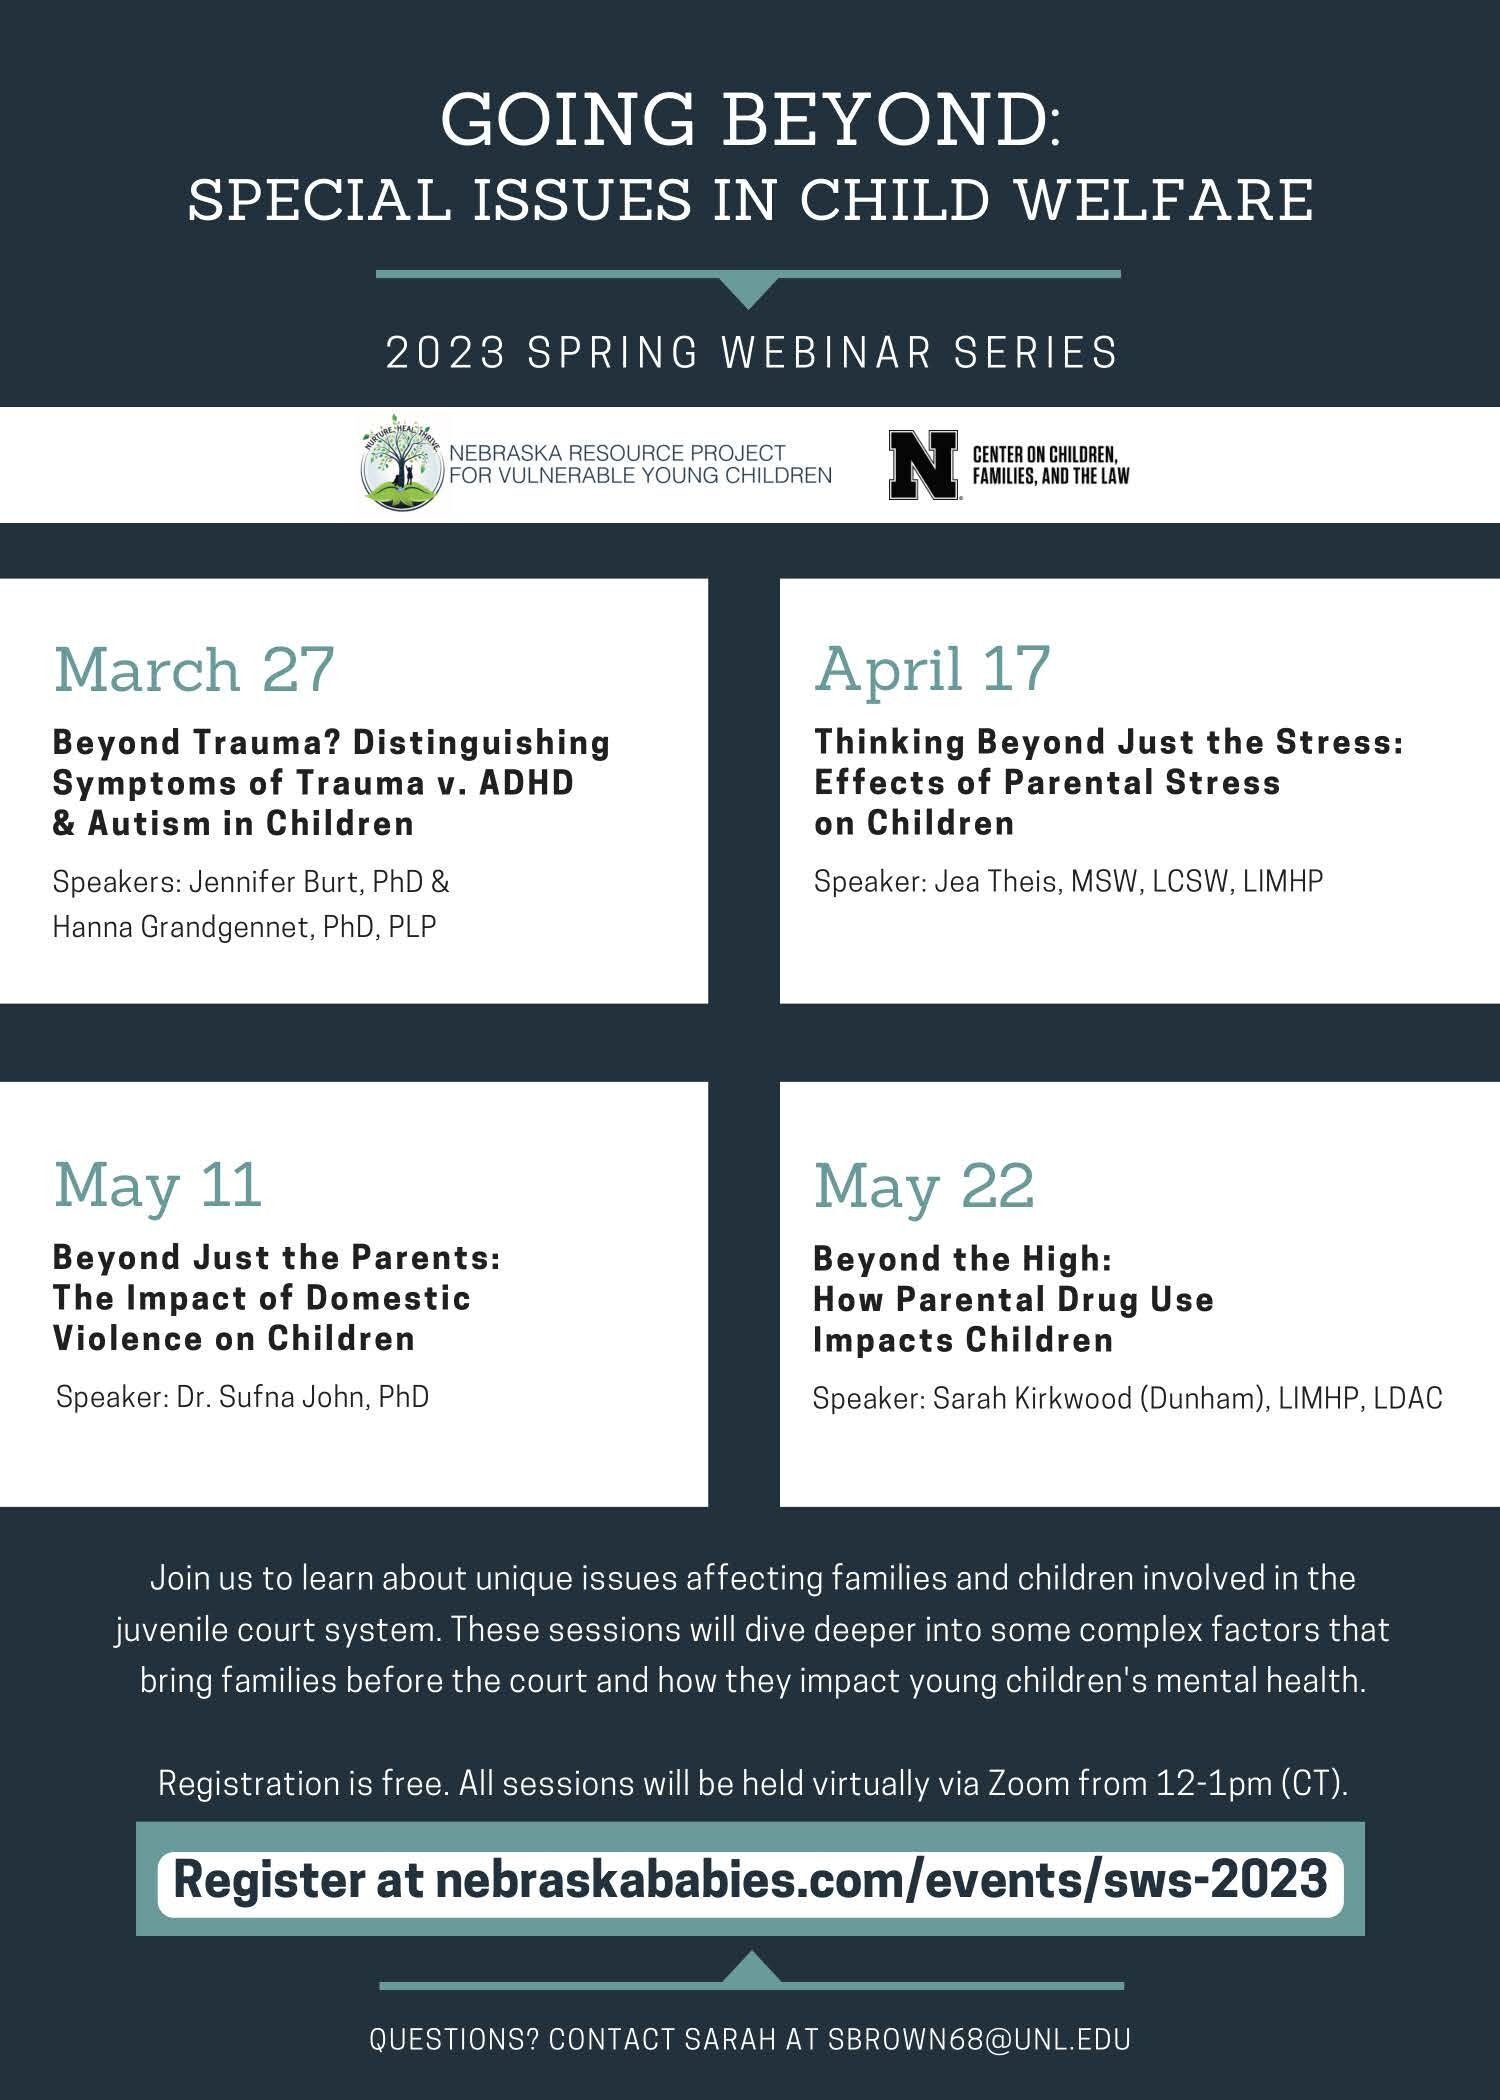 2023 Spring Webinar Series - Center for Children Families and the Law